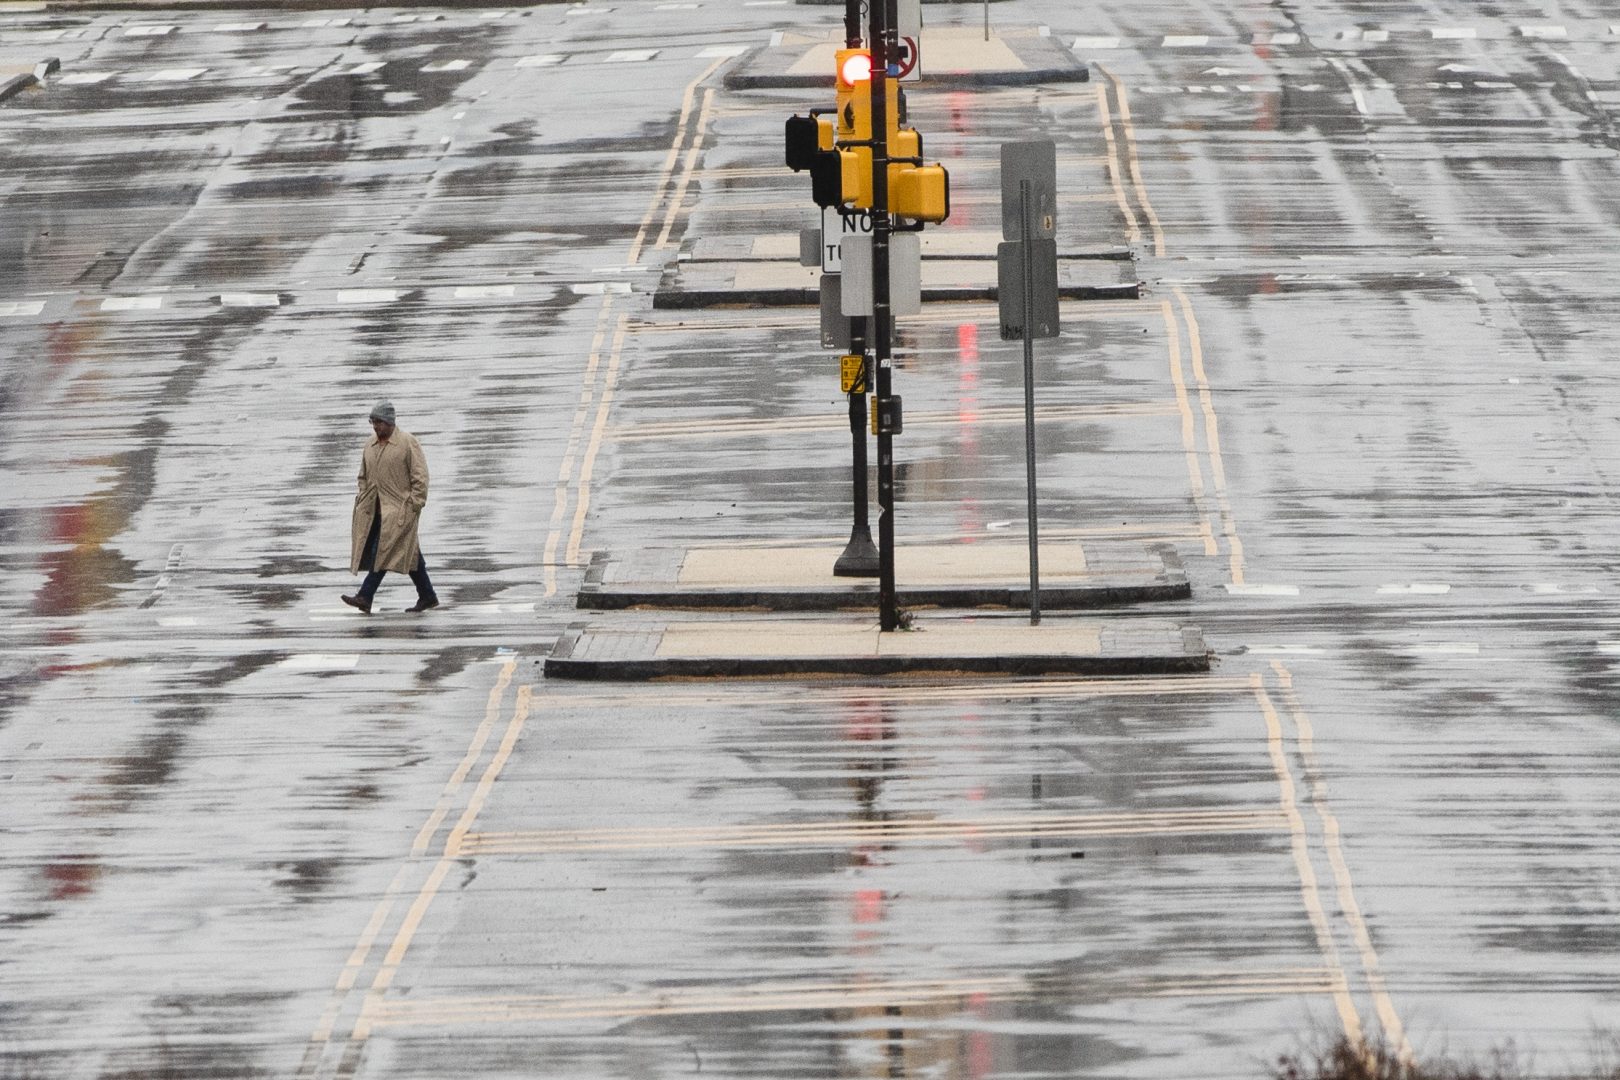 A person crosses the Benjamin Franklin Parkway in Philadelphia, Monday, March 23, 2020. Philadelphia Mayor Jim Kenney is issuing a stay-at-home order to the nation's sixth most-populated city to keep its 1.6 million people from leaving home, except to get food, seek medical attention, exercise outdoors, go to a job classified as essential or other errands that involve personal and public safety.